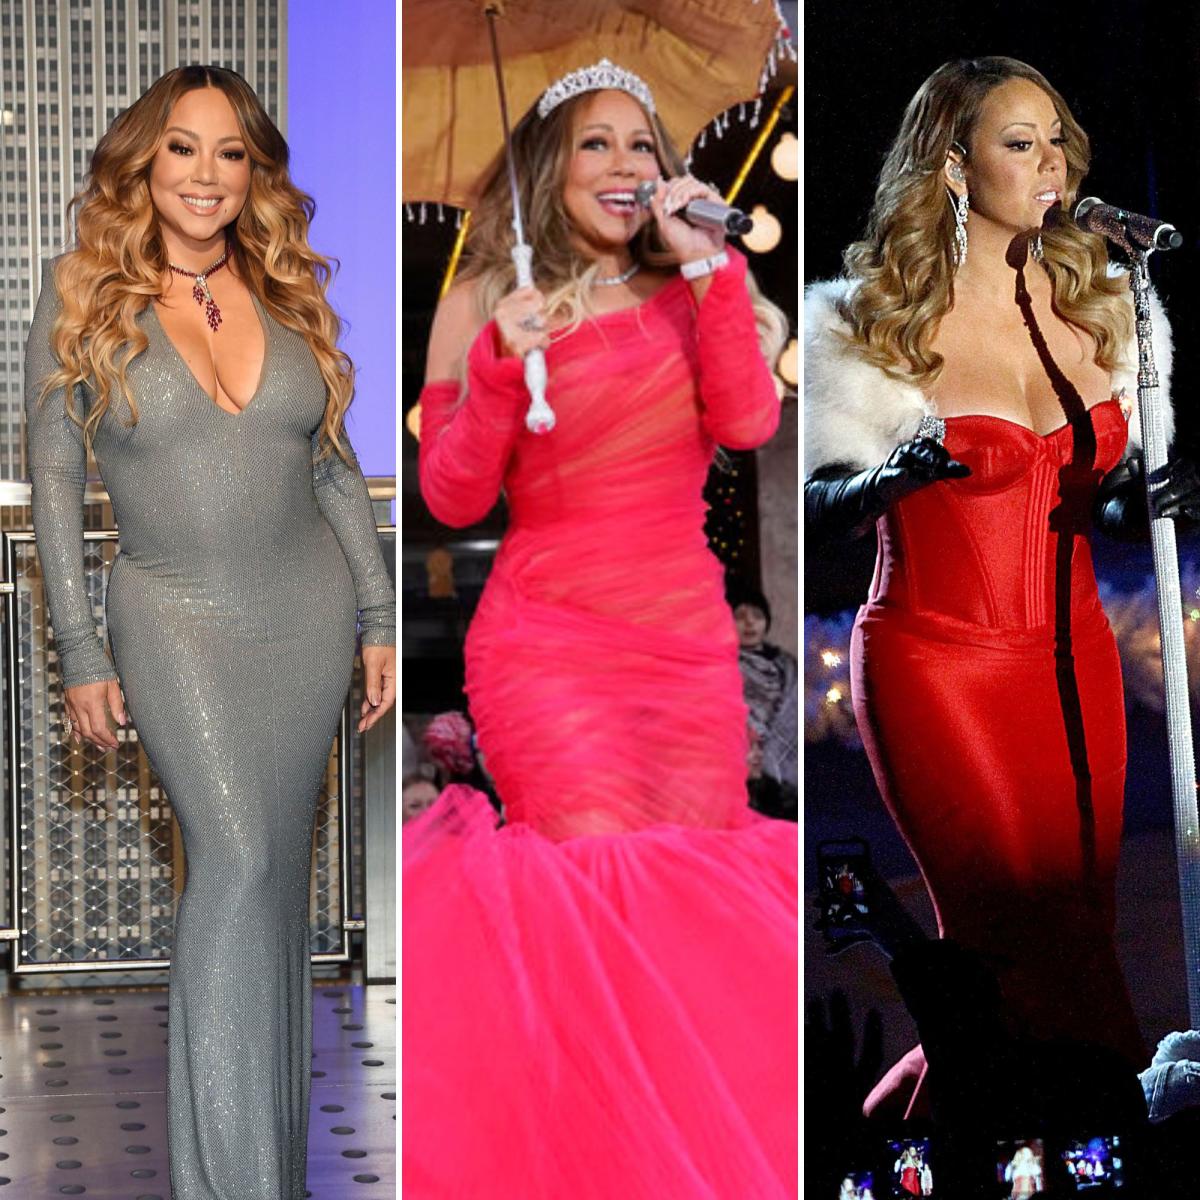 Mariah Careys Sexiest Christmas Outfits The Holiday Queens Most Memorable Gowns And Other Looks 